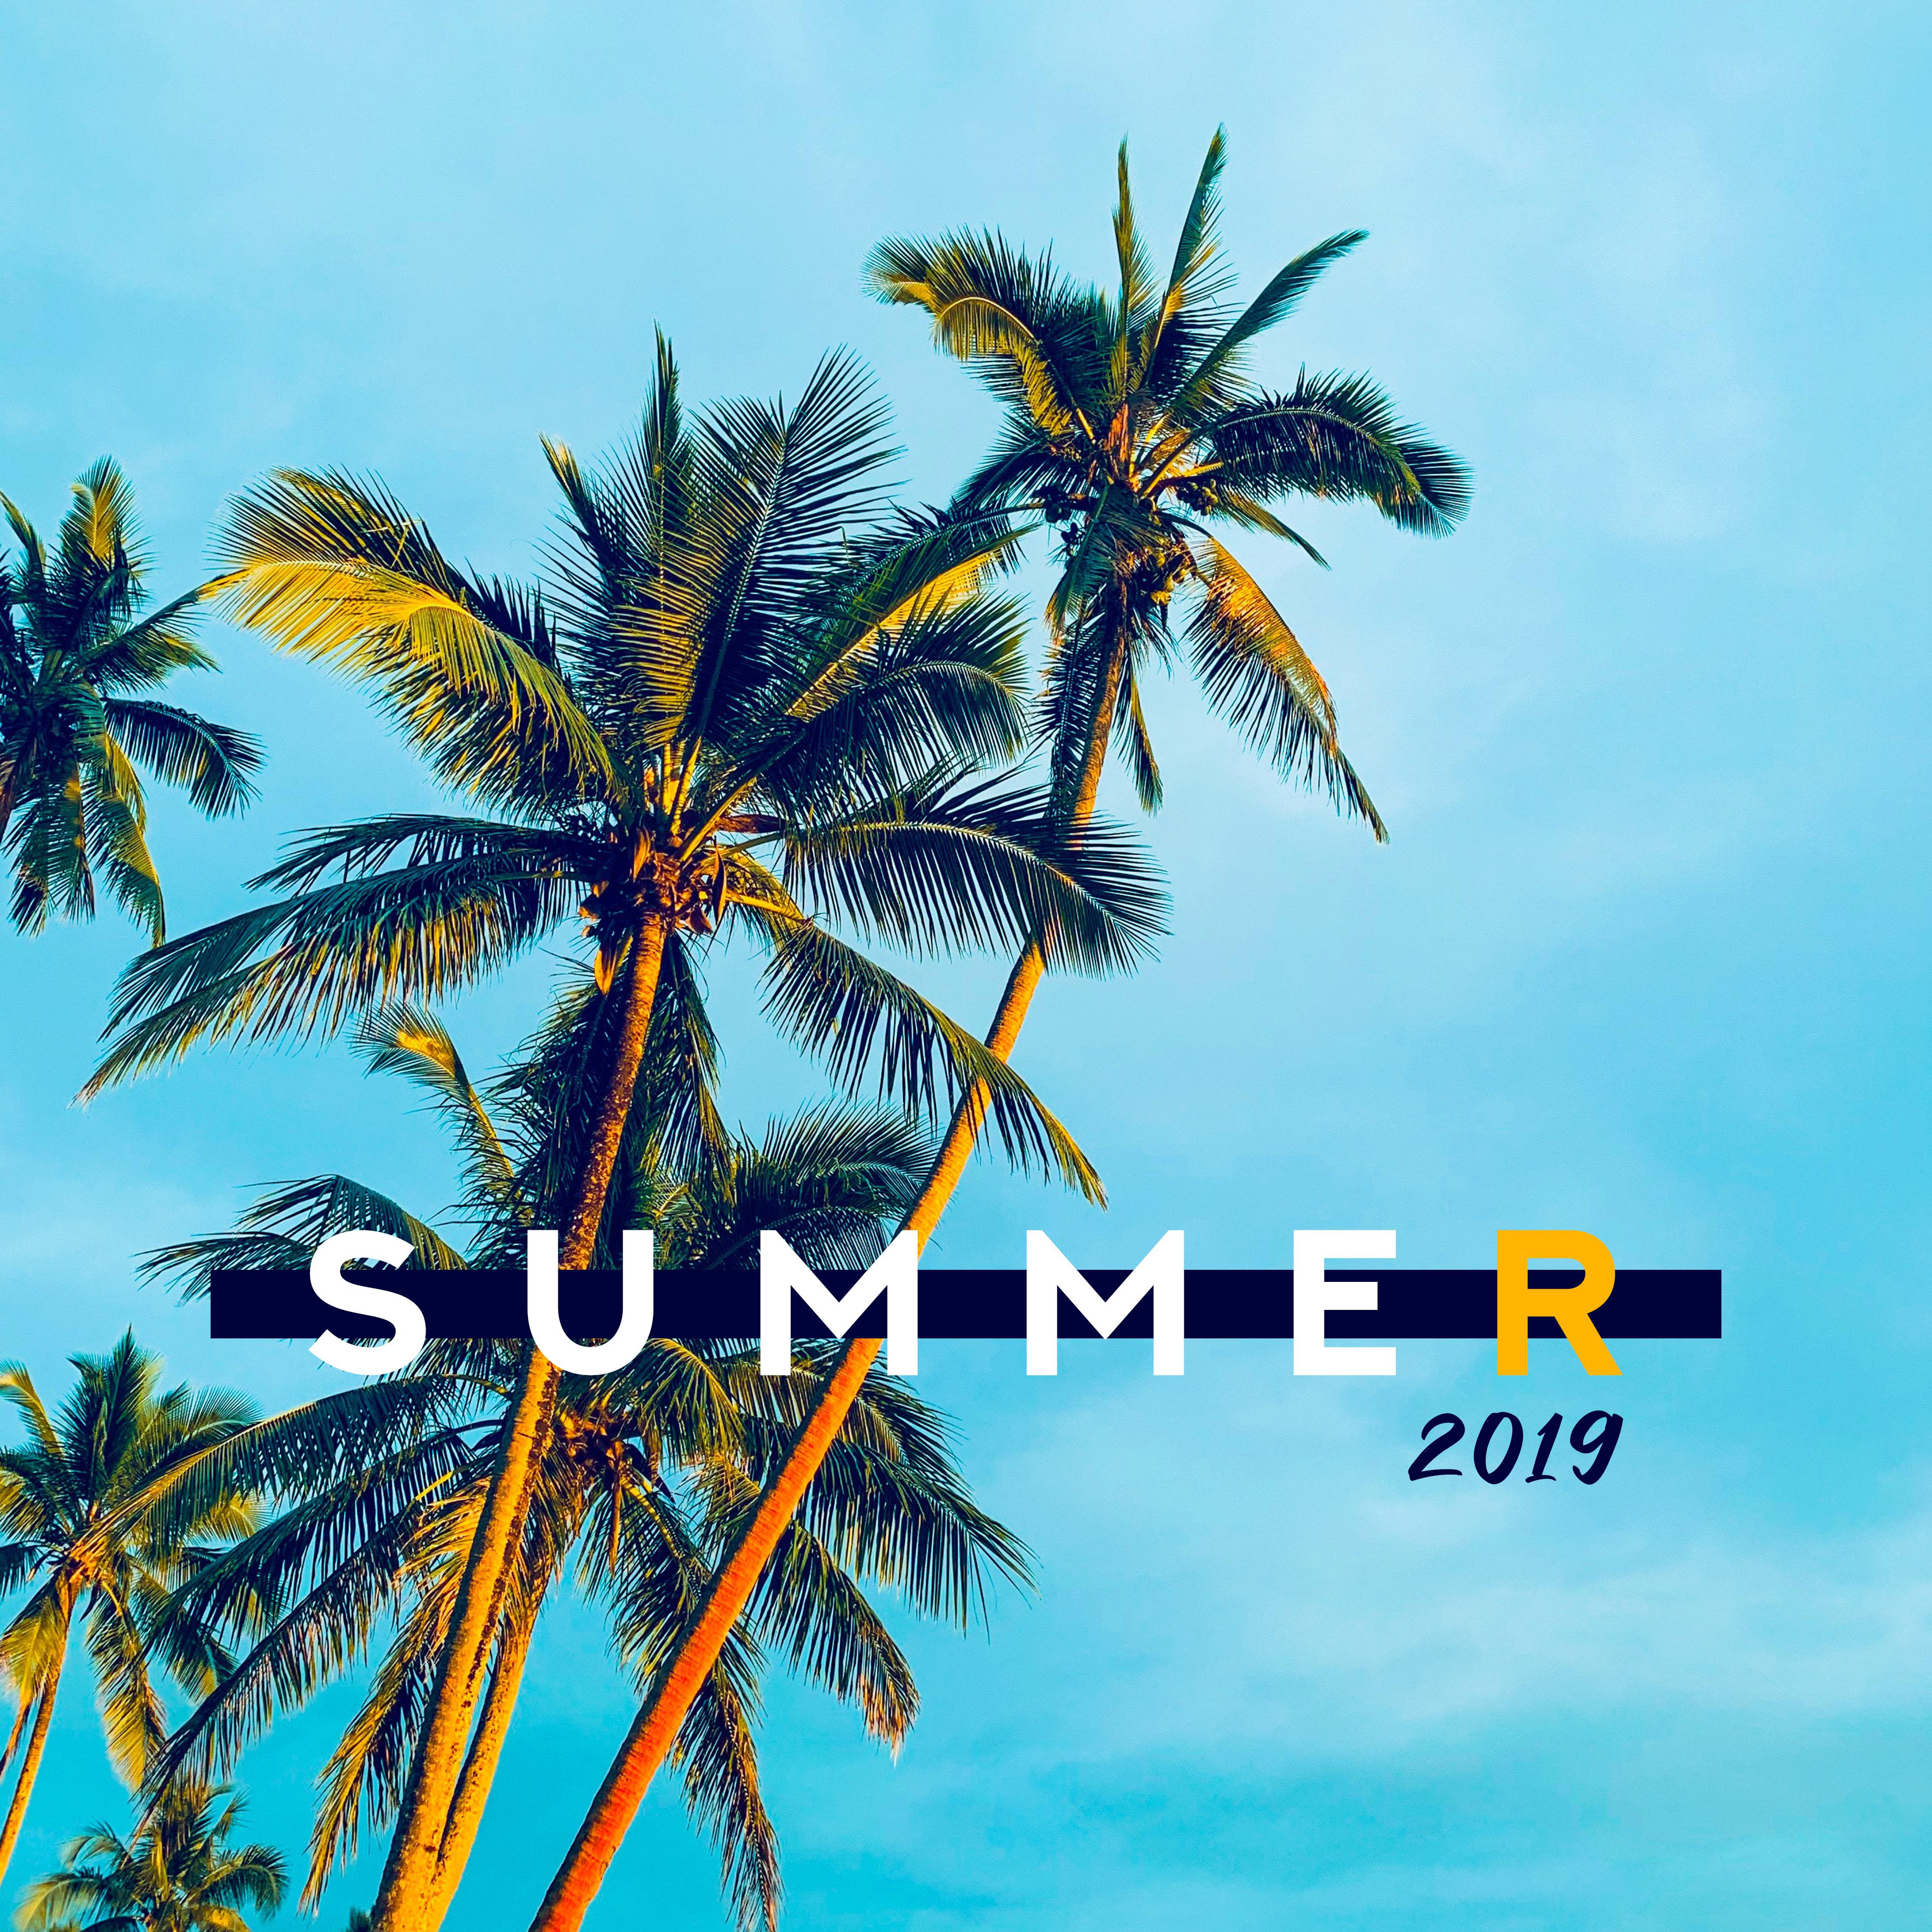 Summer 2019 – Sunny Chill Out, Beach Music, Reduce Stress